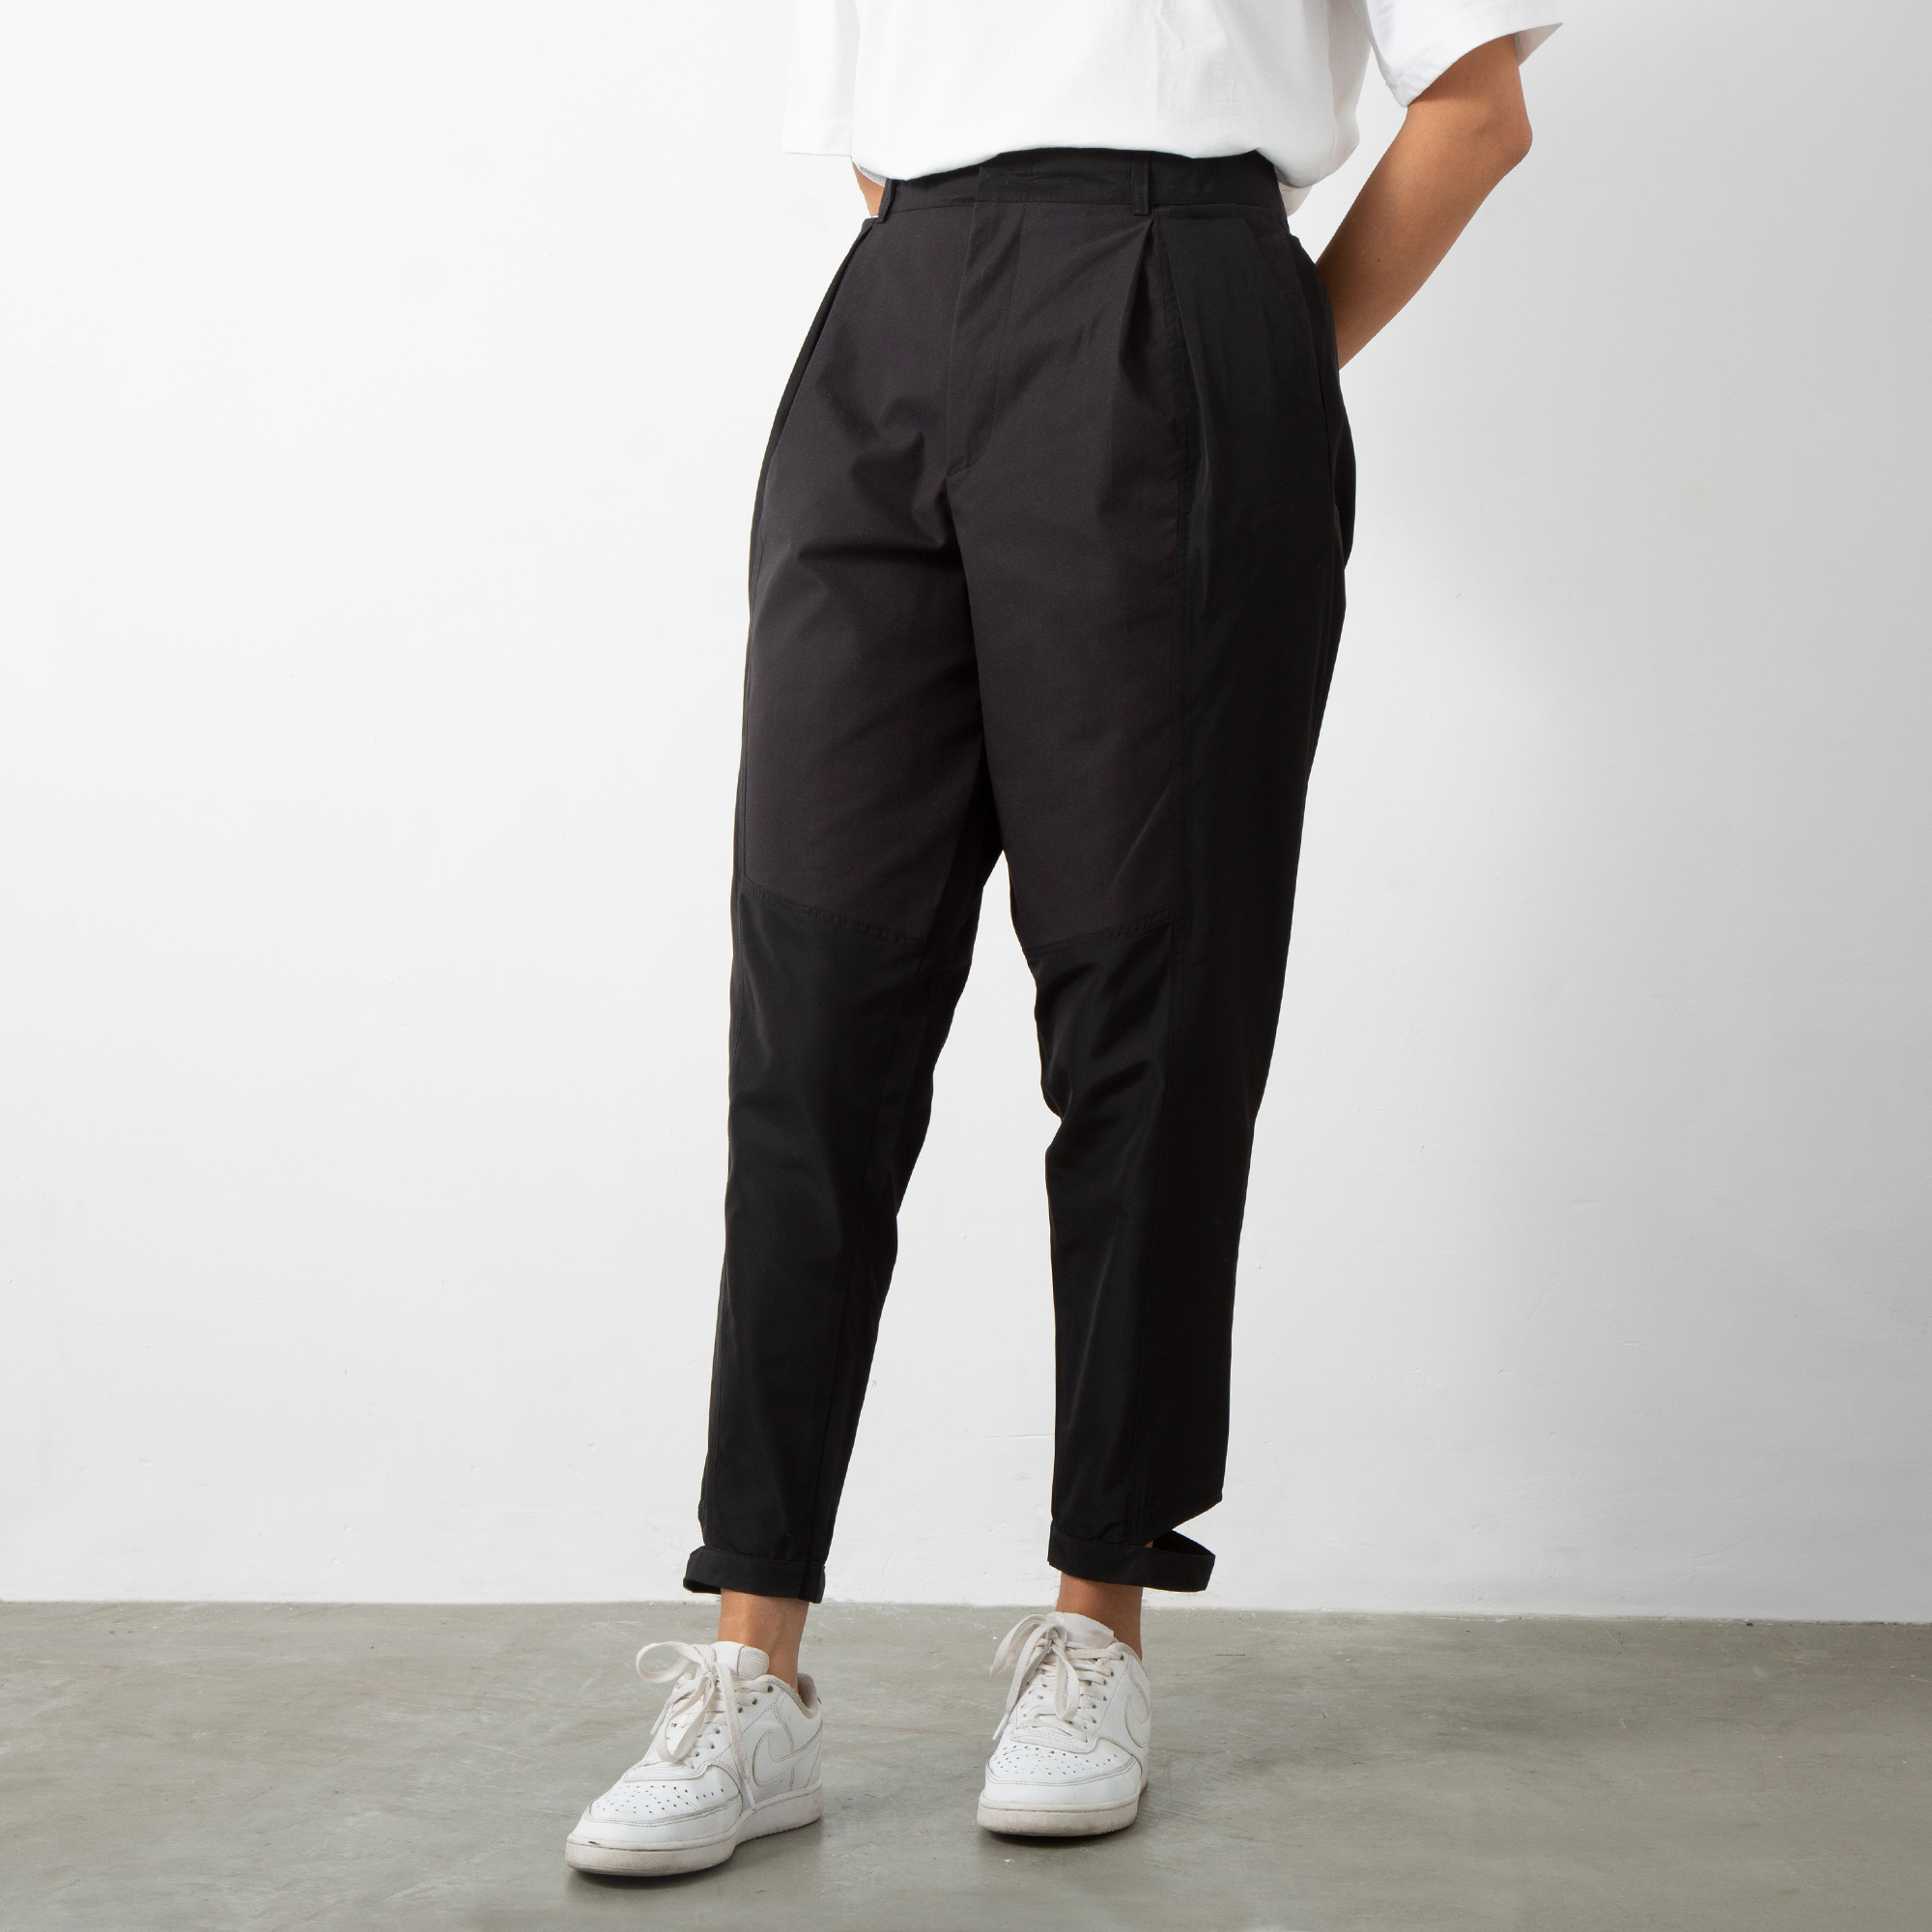 Picture of Memory and linen women's pants